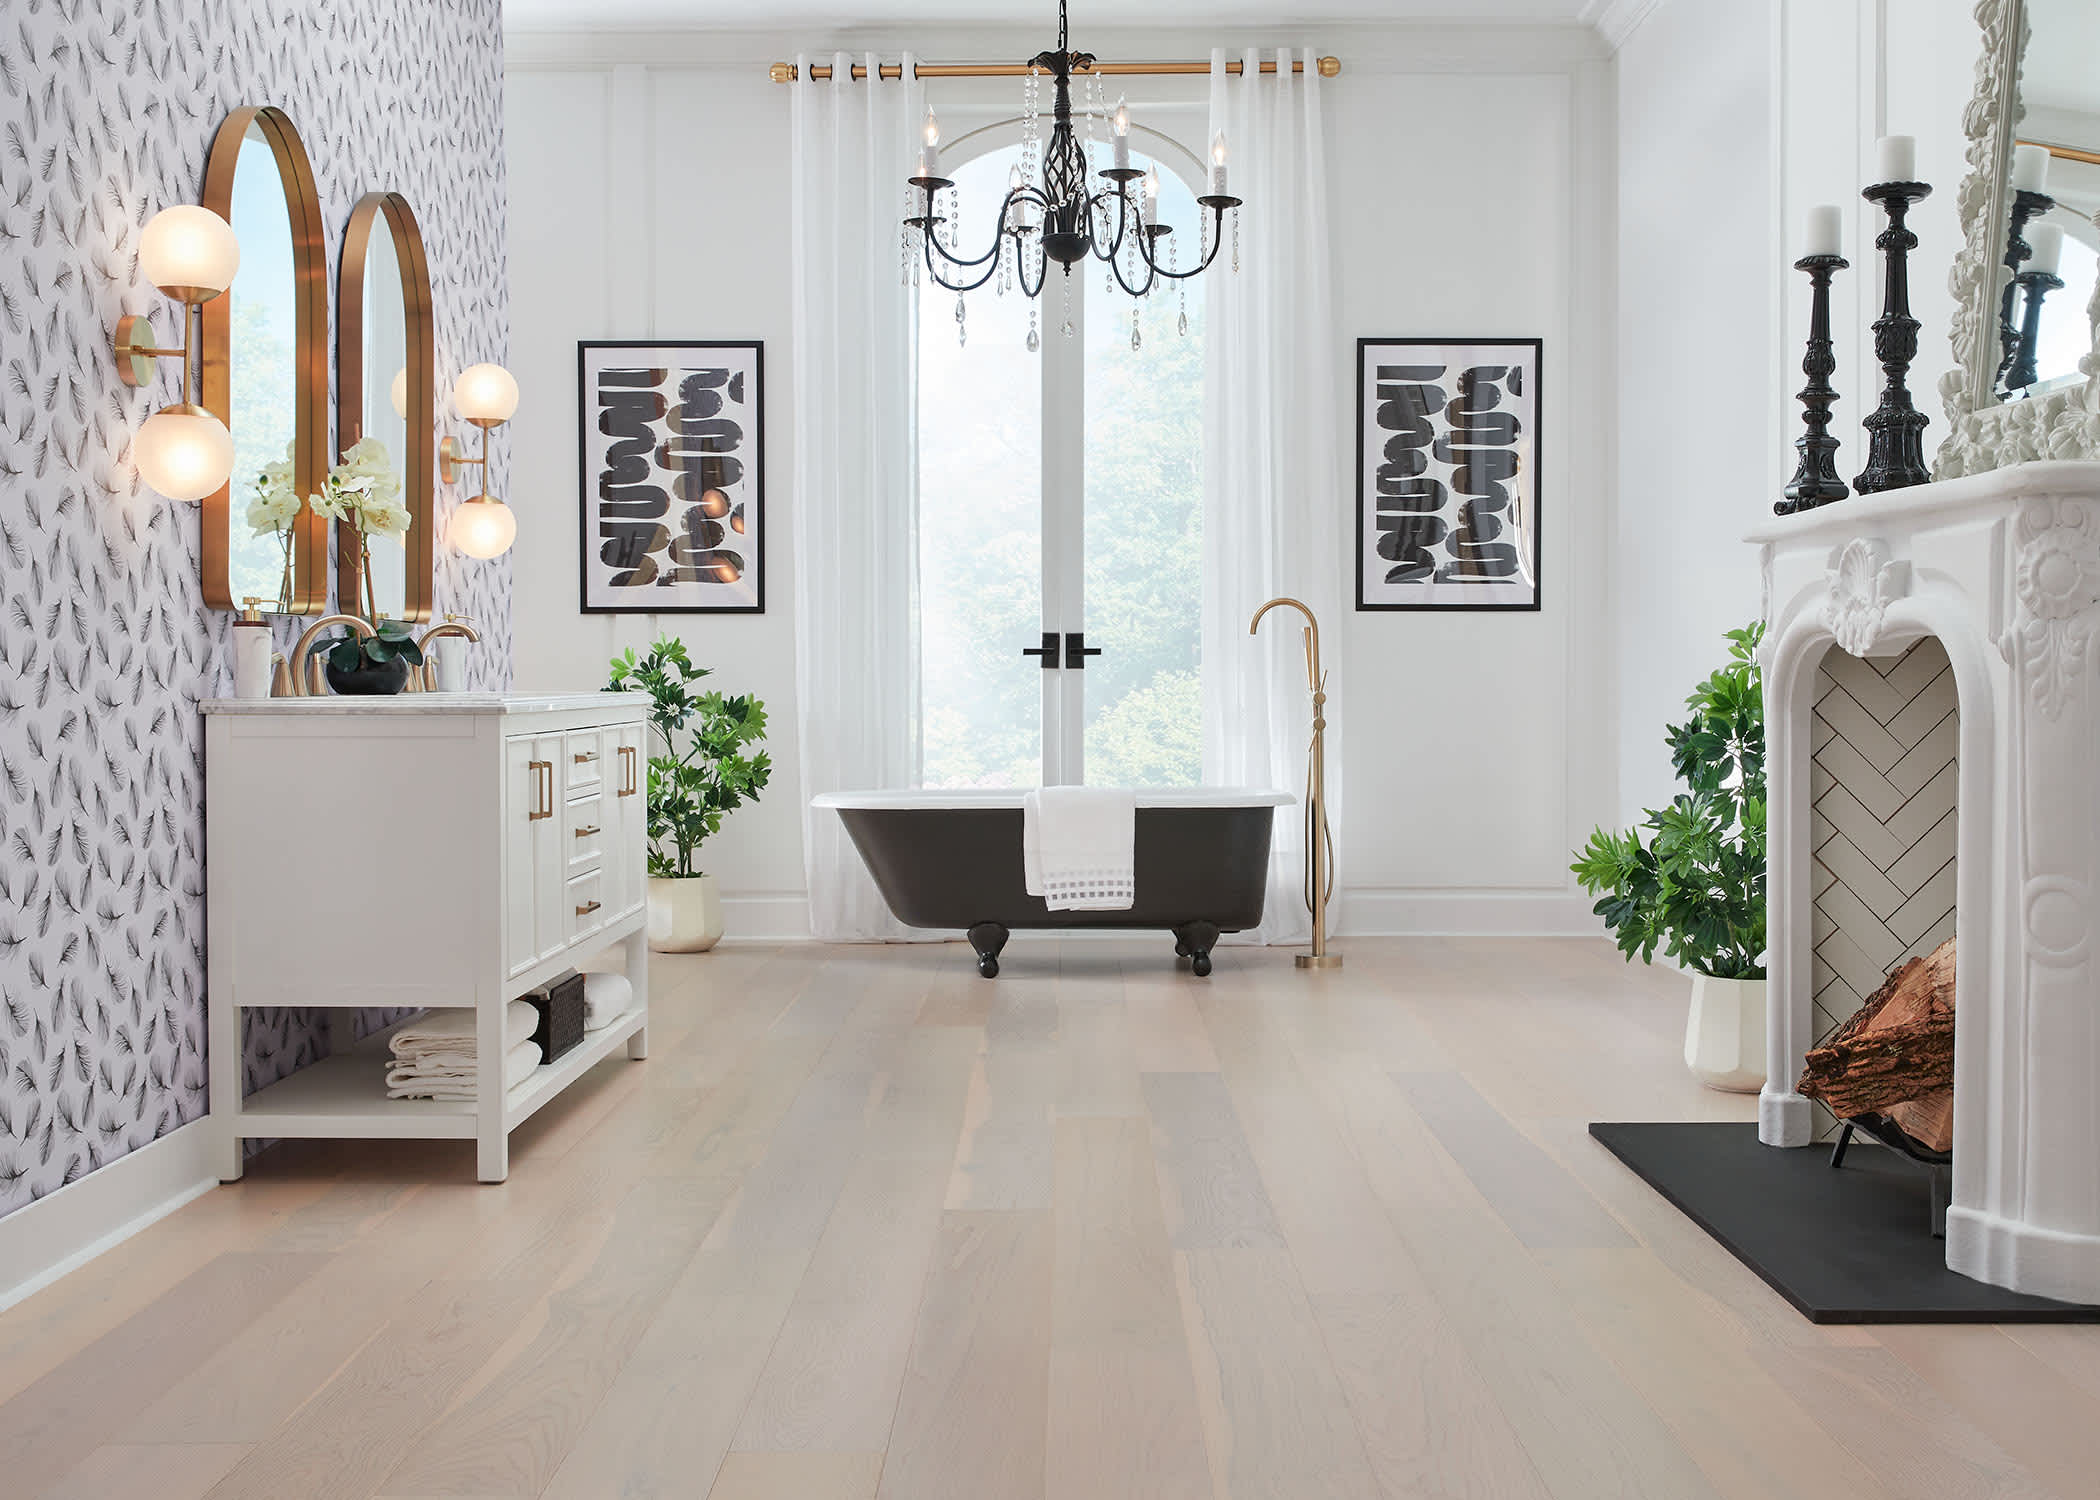 7mm+pad x 7.5 in. Great Plains Oak Water-resistant Engineered Hardwood Flooring in bathroom with black clawfoot tub with black chandelier and white ornate fireplace and black and white wallpaper